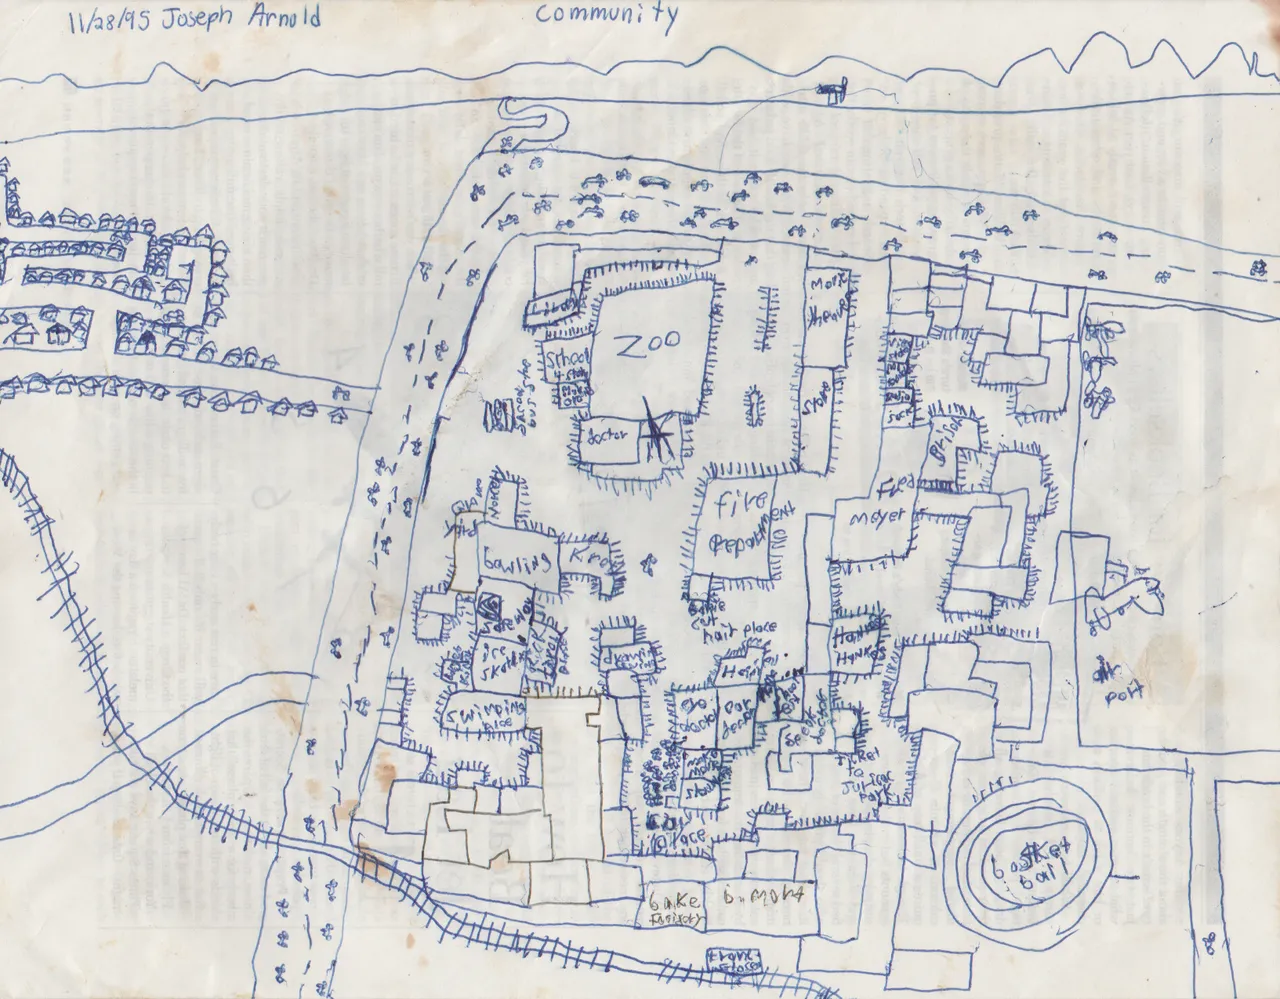 1995-11-28 - Tuesday - SIM City Drawing, by 8 yr old Joey Arnold-1.png